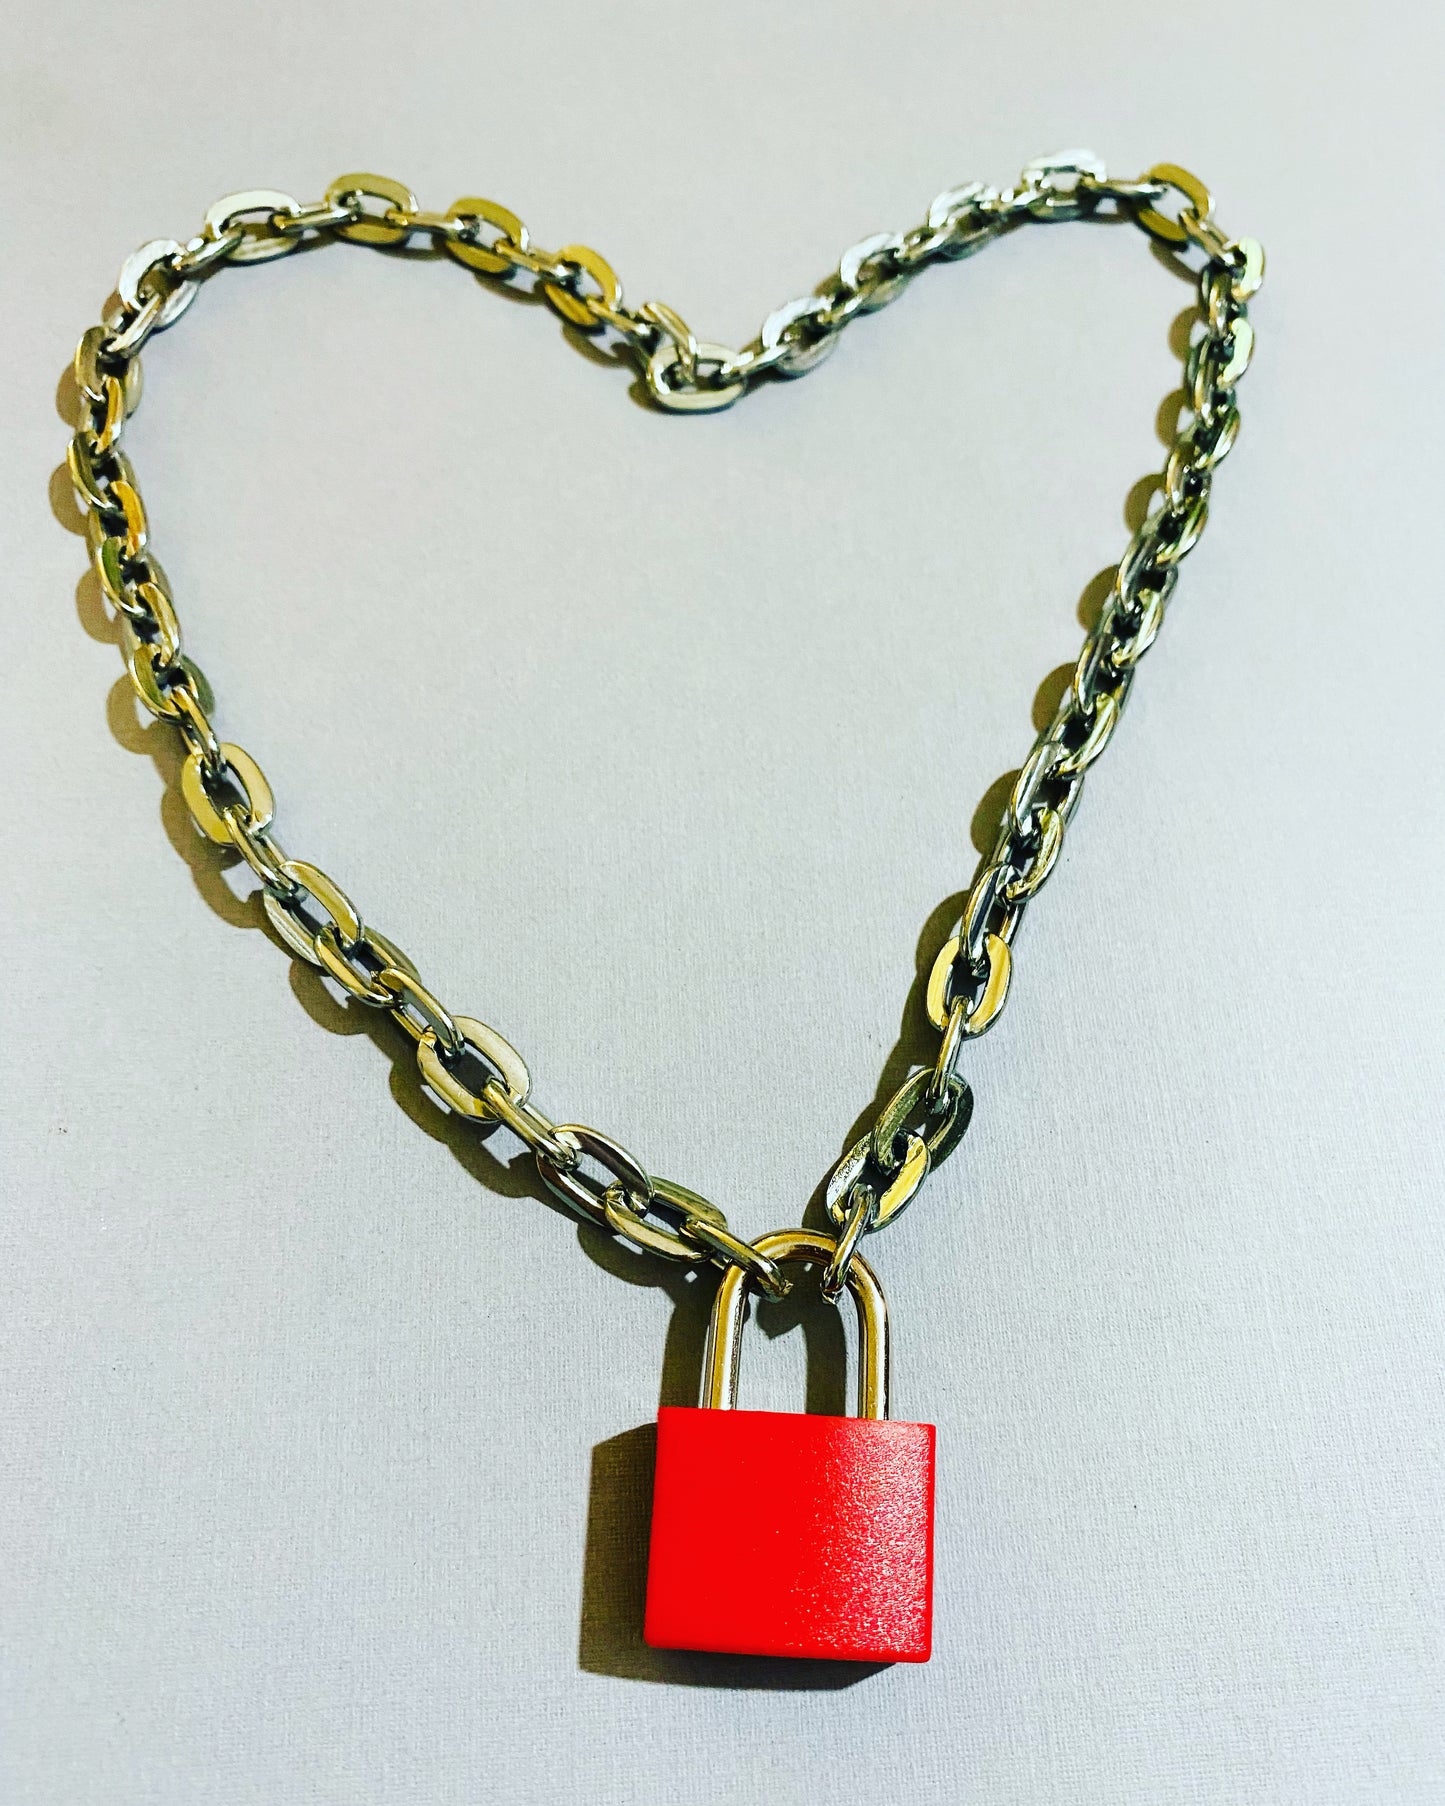 LOCKED AND LOADED NECKLACE Padlock and key choker Jewelry